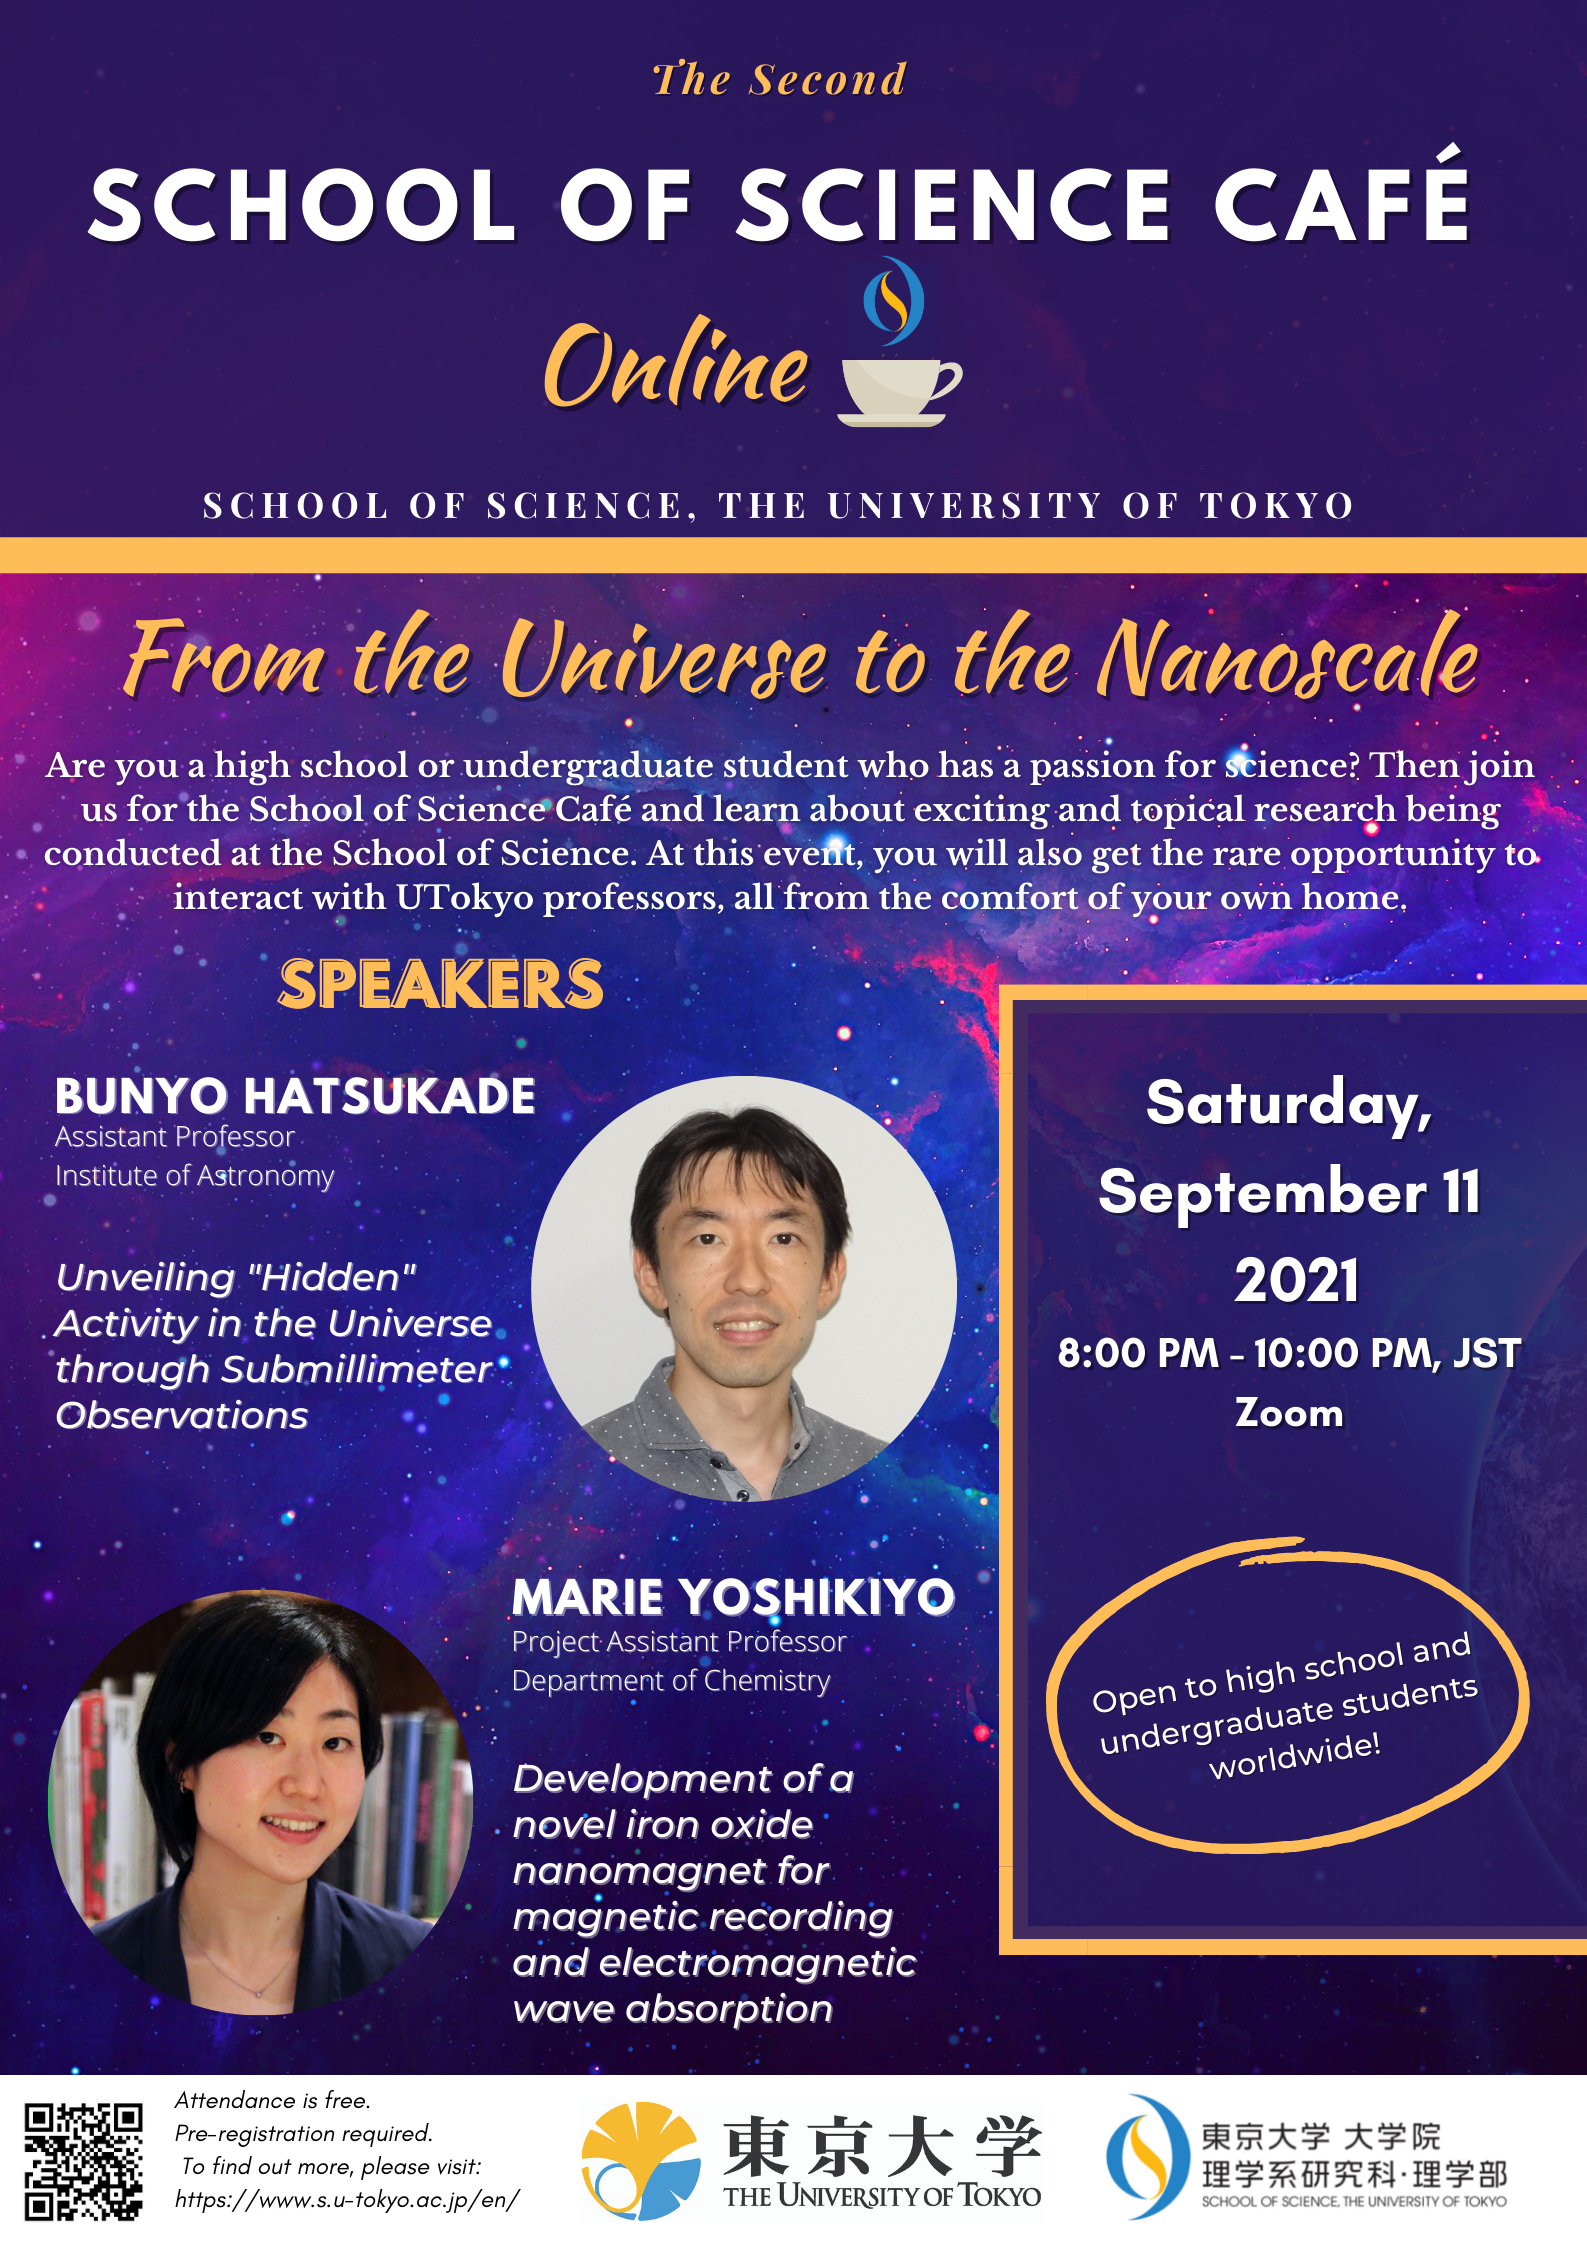 【EVENT】The 2nd School of Science Café 2021 ~Online~